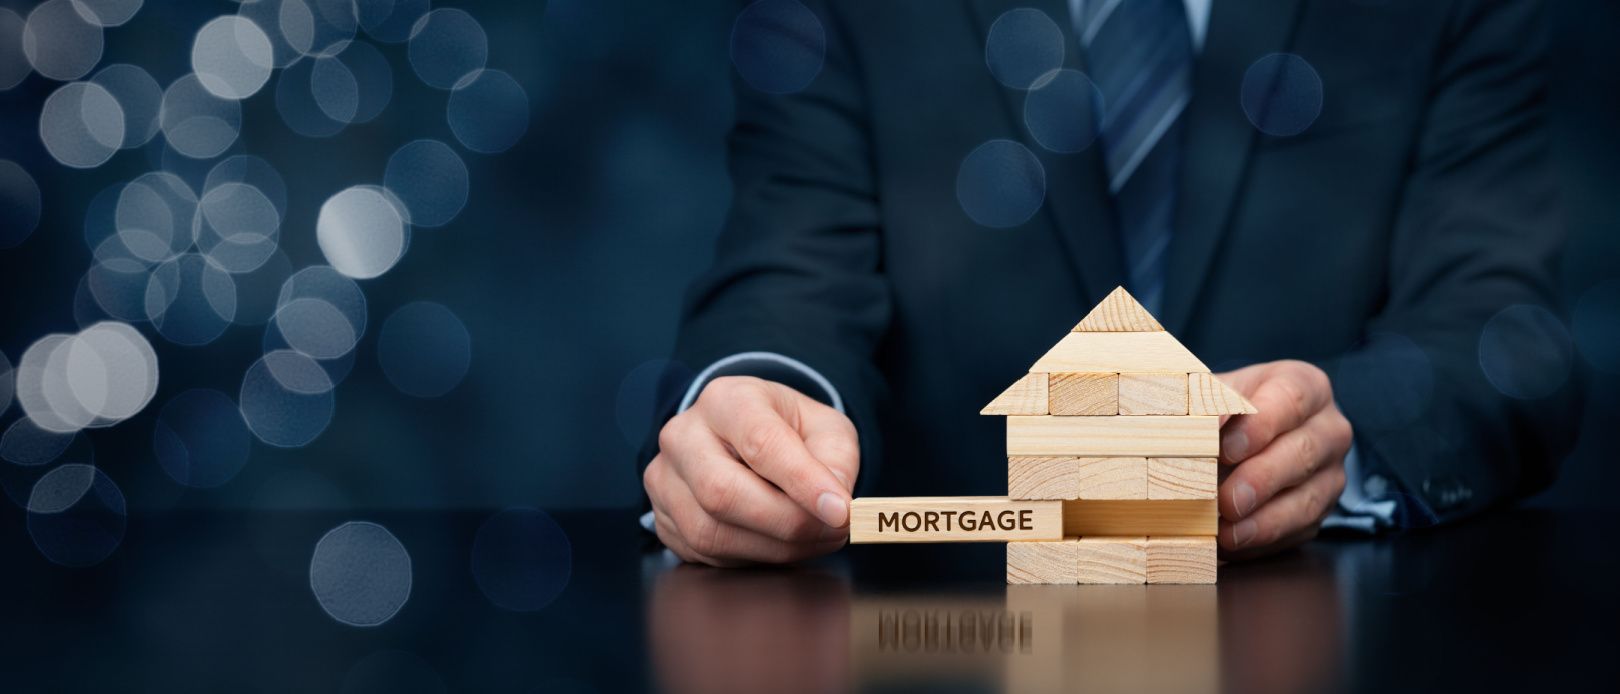 Mortgage lender last piece of the puzzle